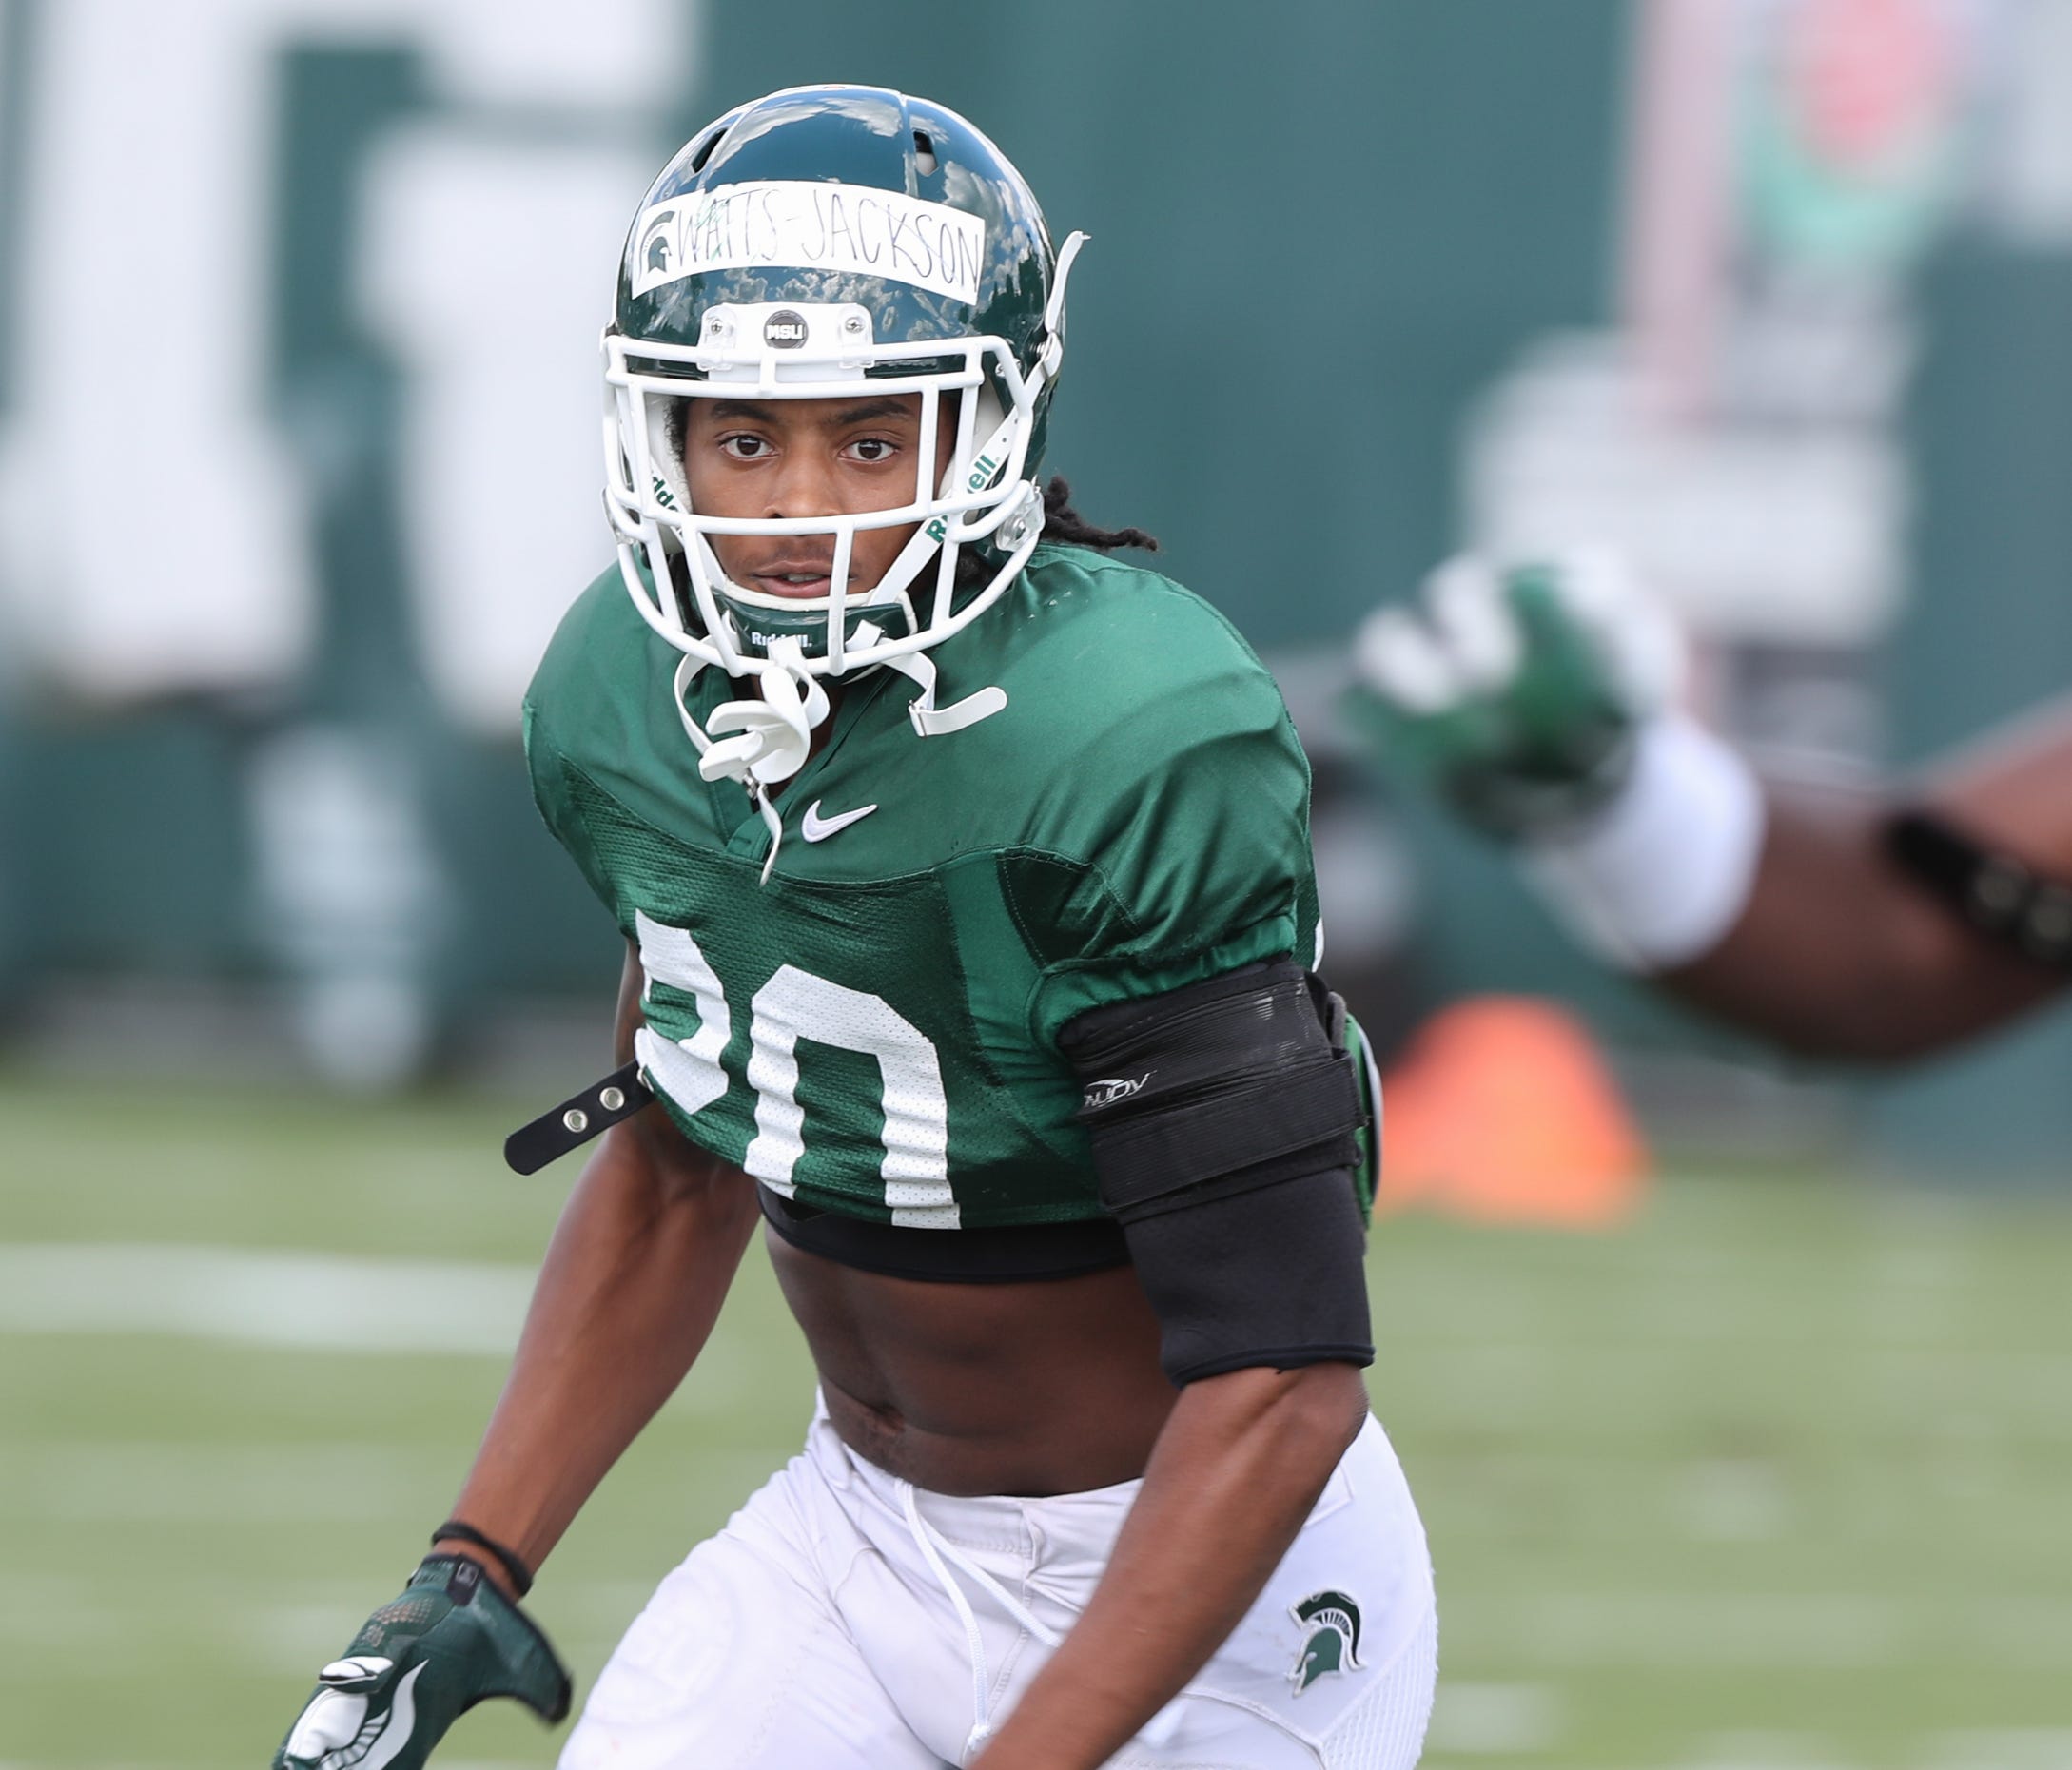 Michigan State defensive back Jalen Watts-Jackson goes through drills during practice at the Duffy Daugherty football facility in East Lansing, MI, Monday, August 22, 2016.